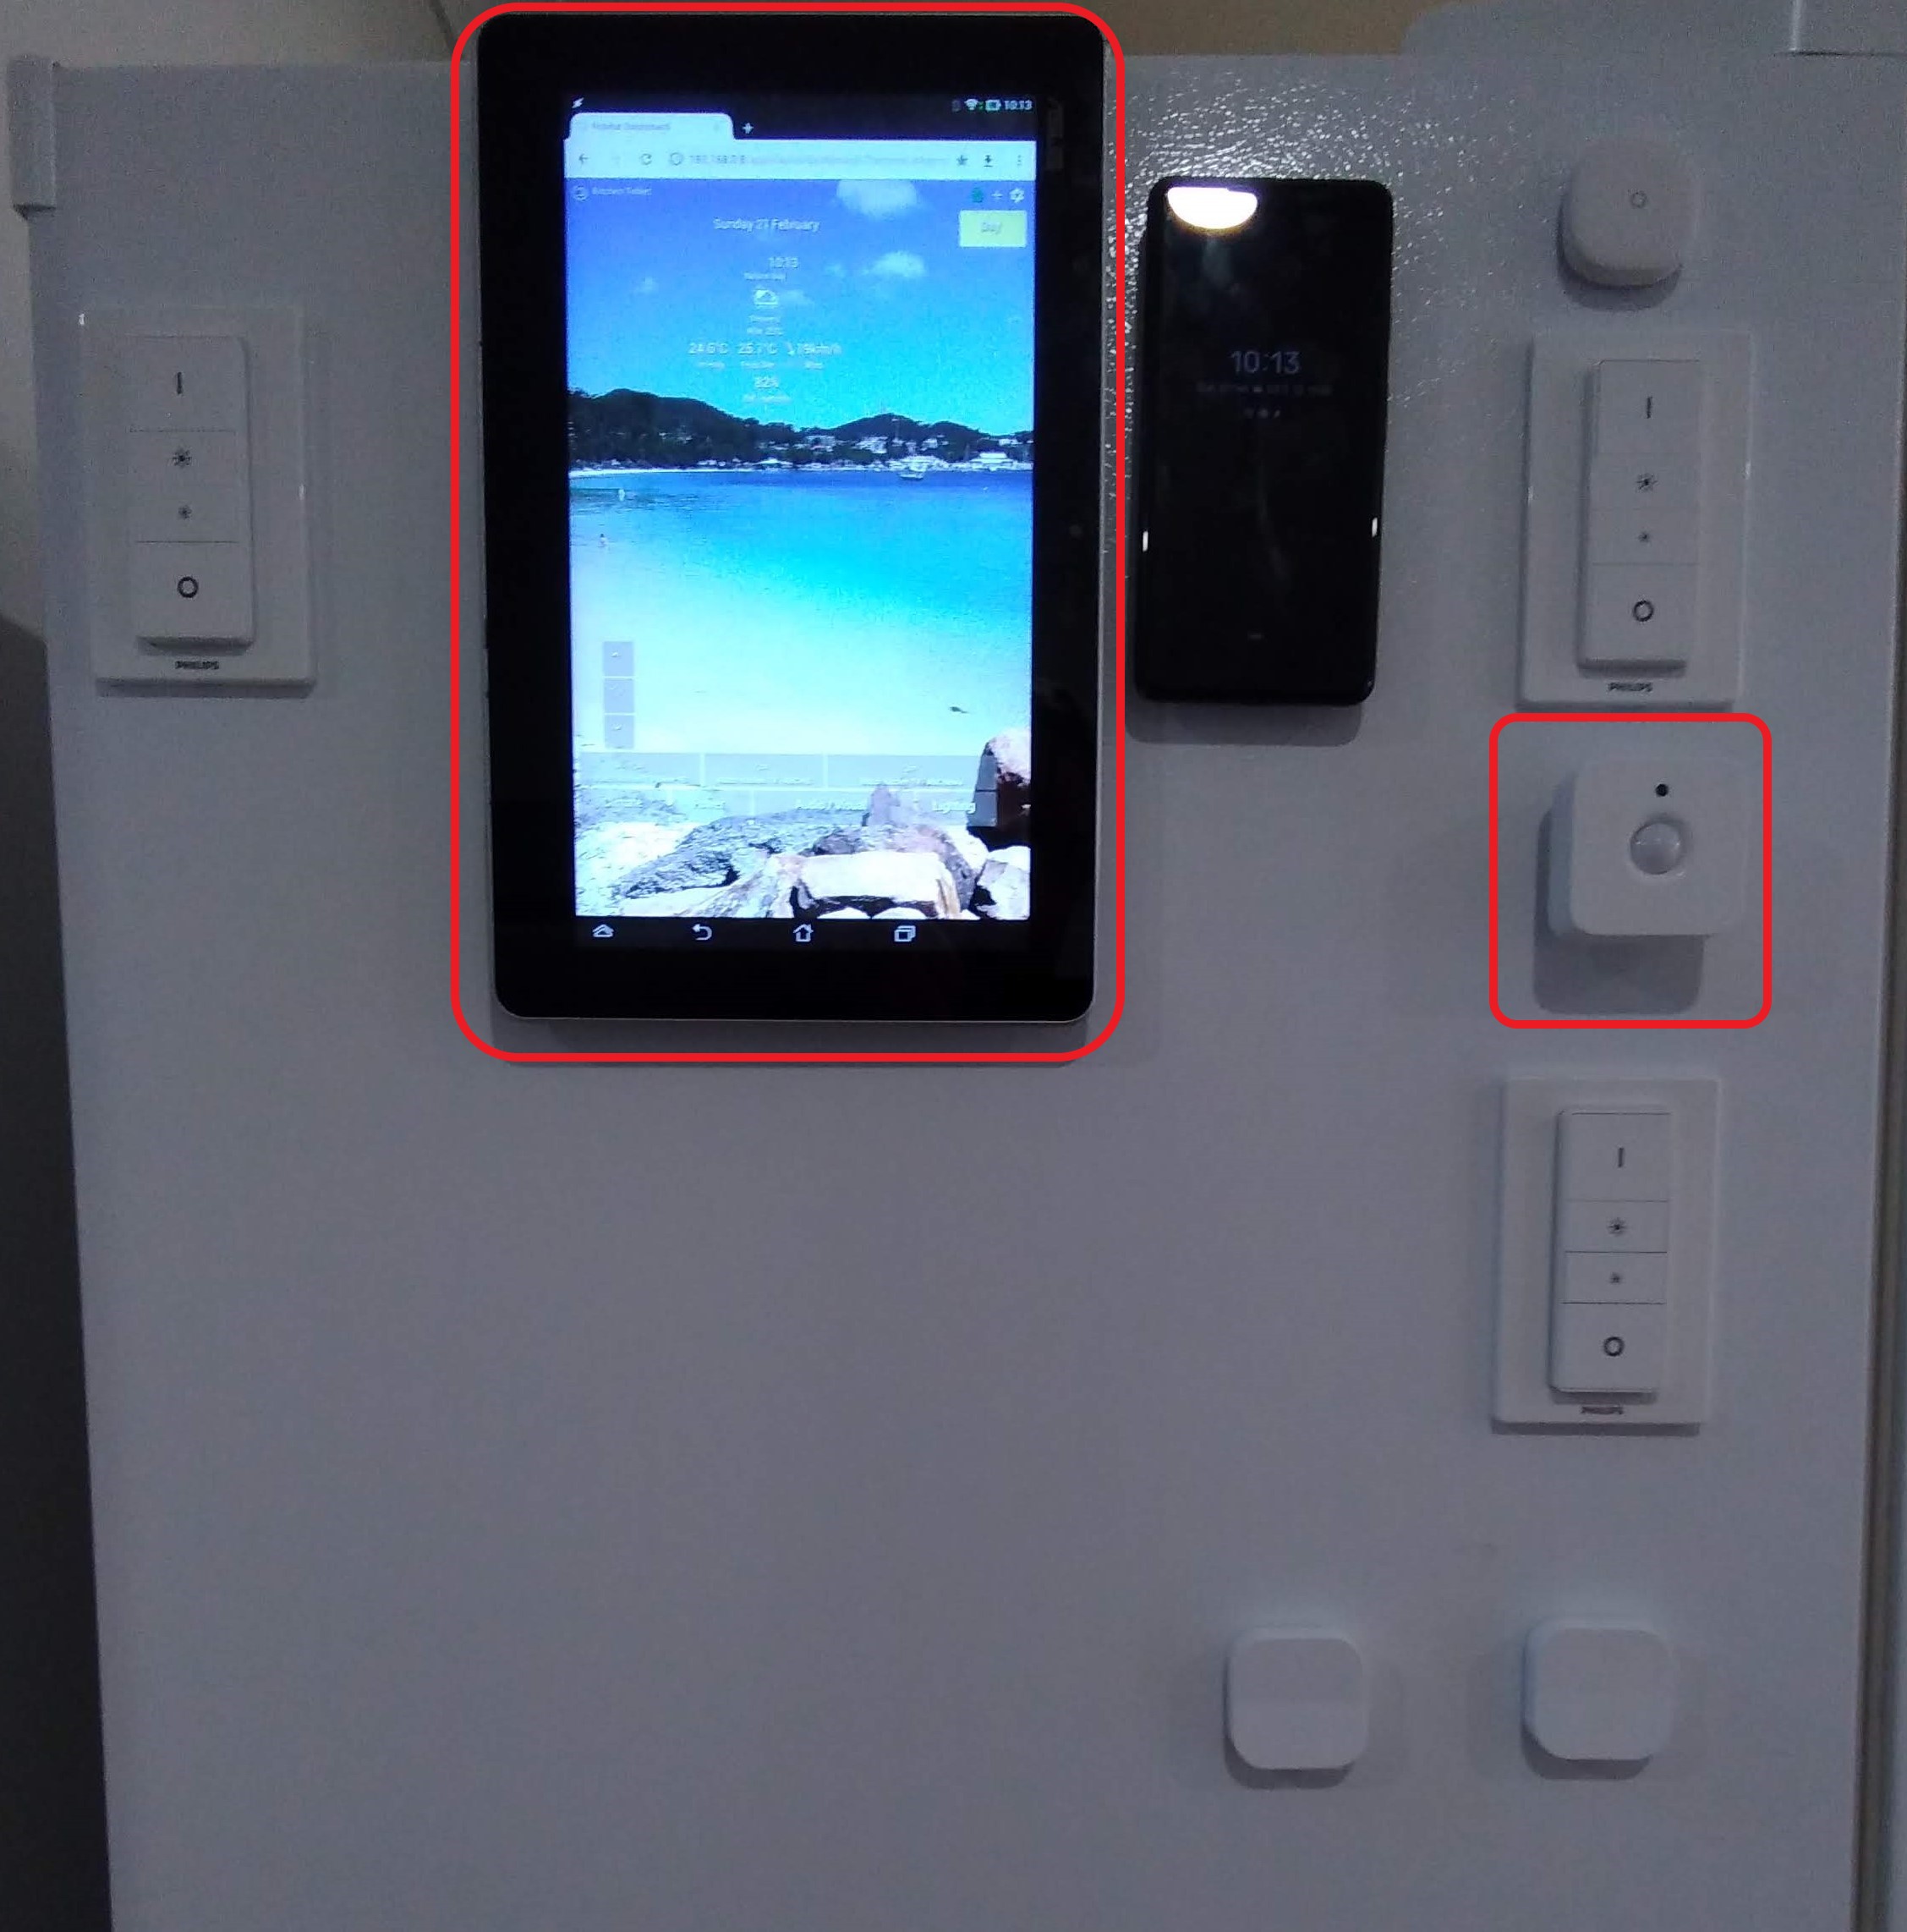 Motion Sensor and Tasker to Turn on Tablet (No Required) - Here's a cool I did! -